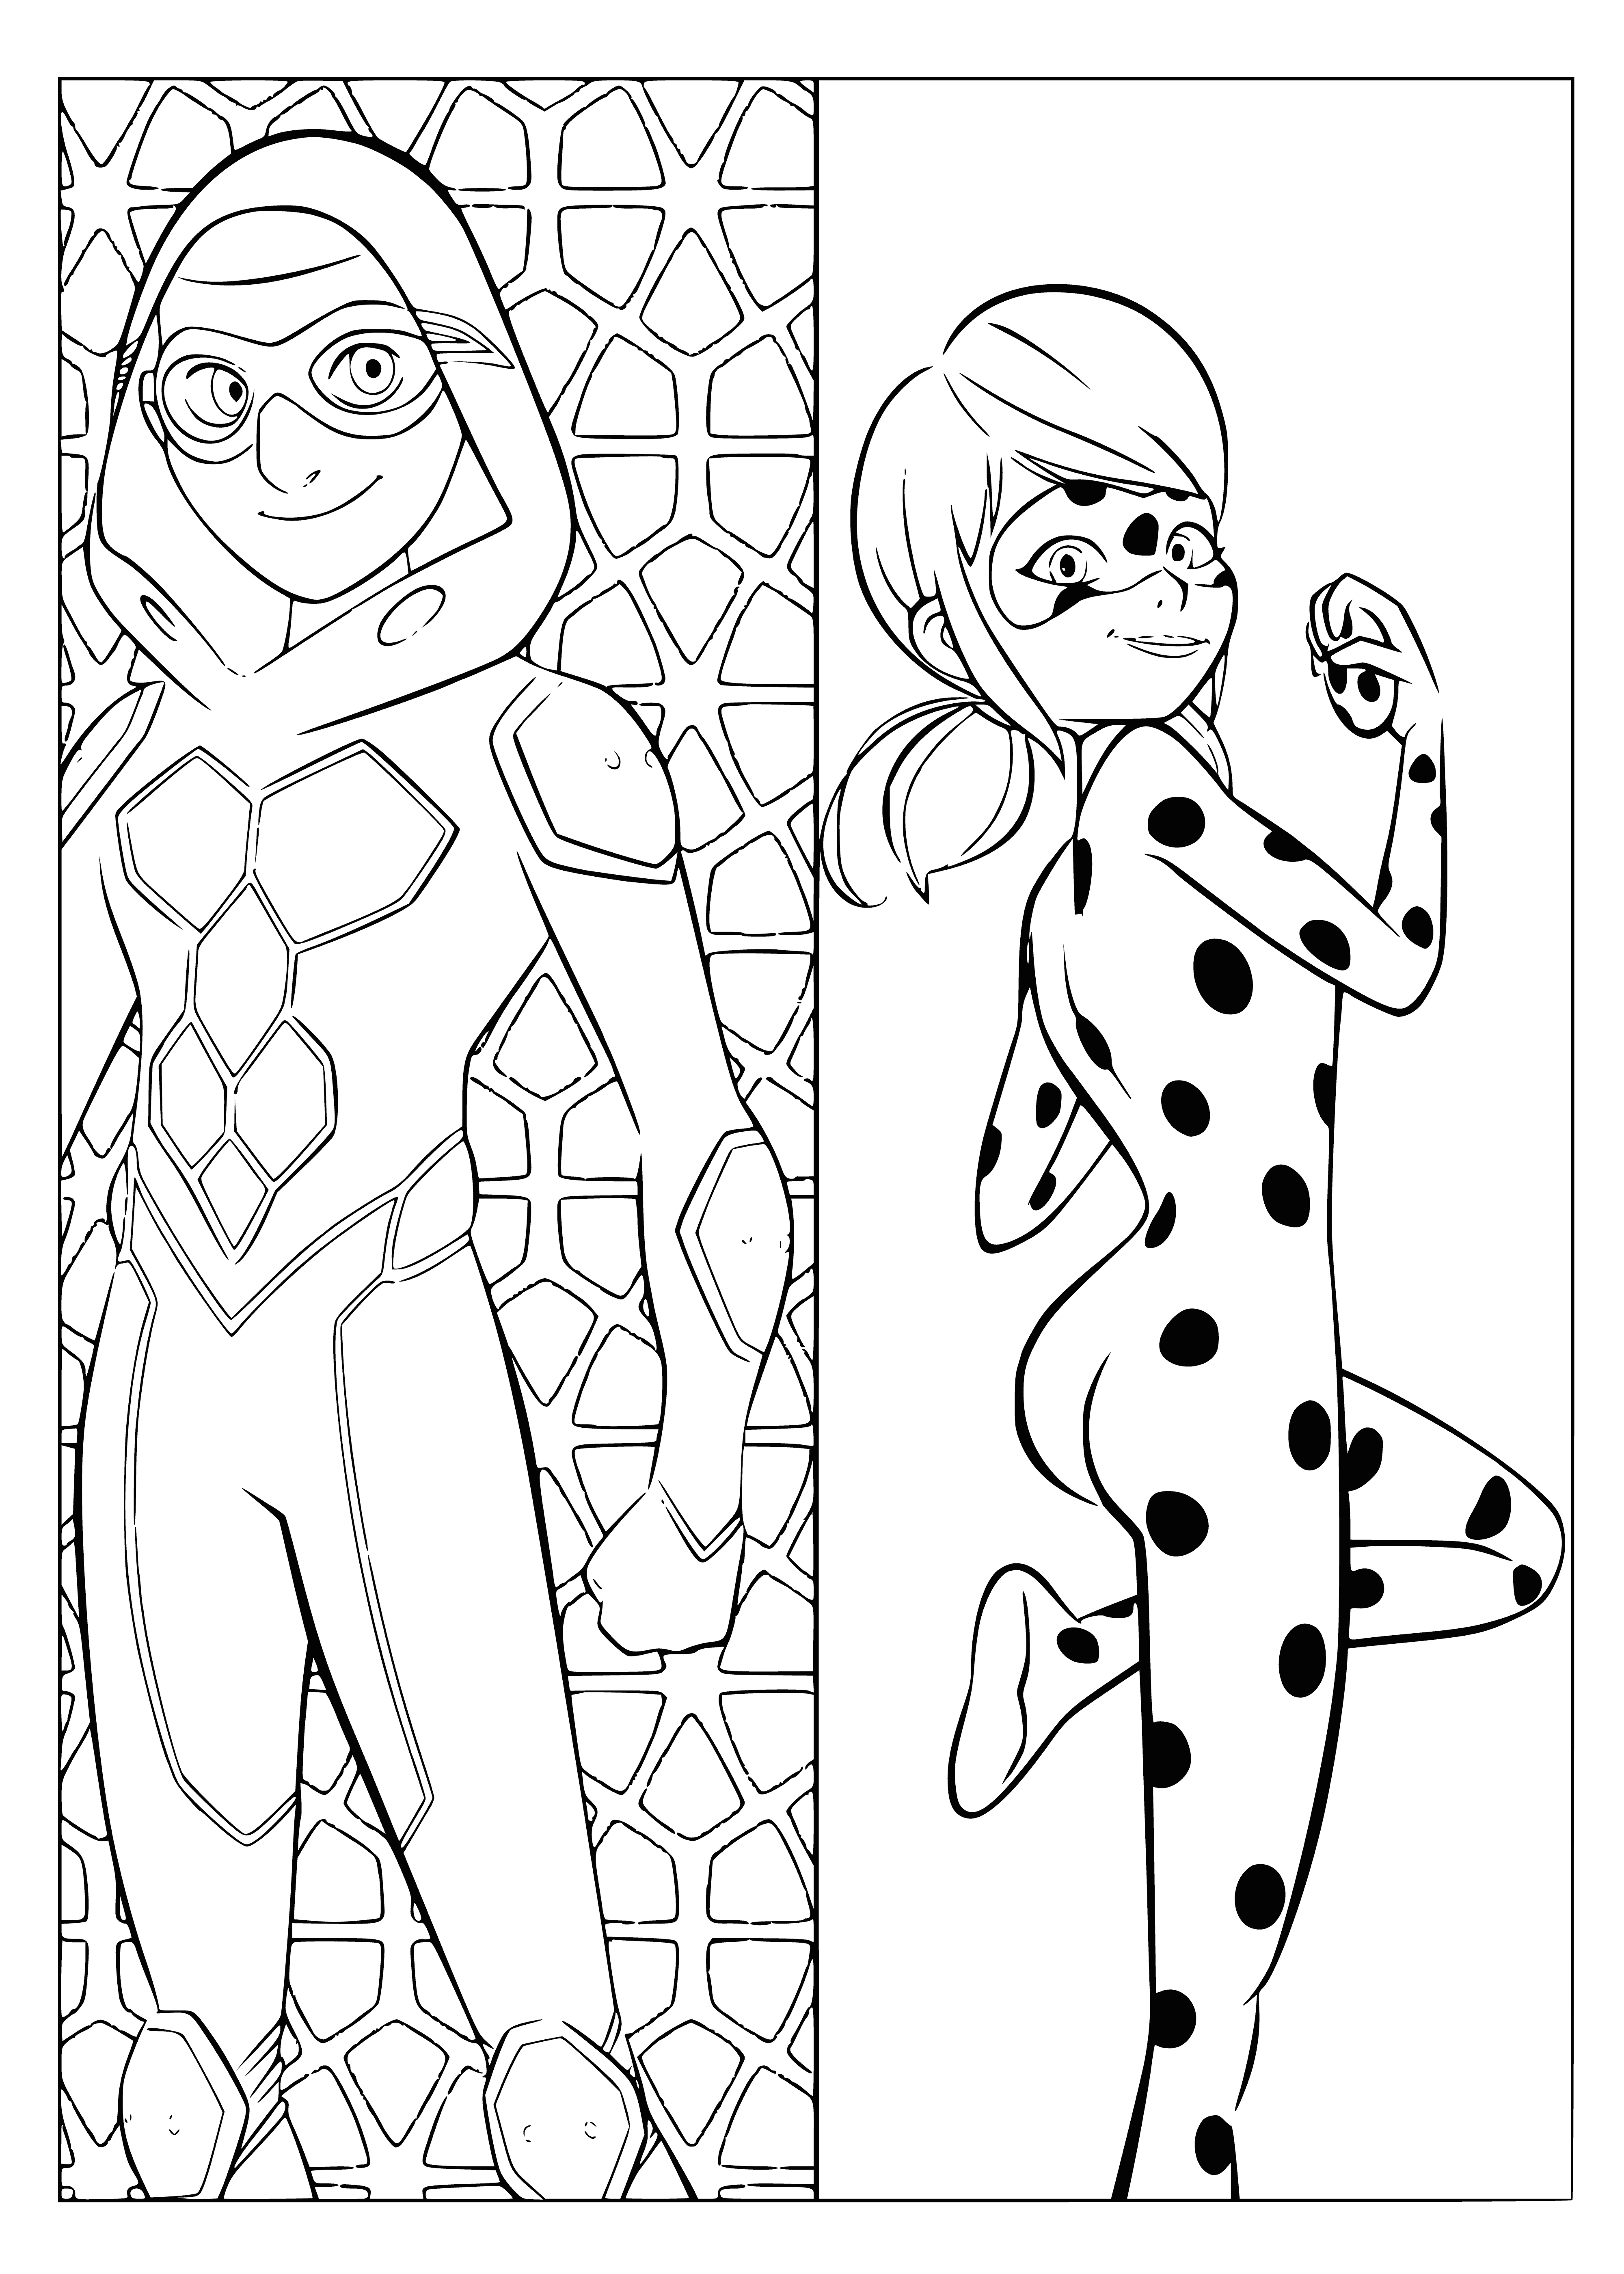 coloring page: Two costumed people, him wearing a black & red suit & mask, her with a red dress & black spots, positive & together, she holding a bag.